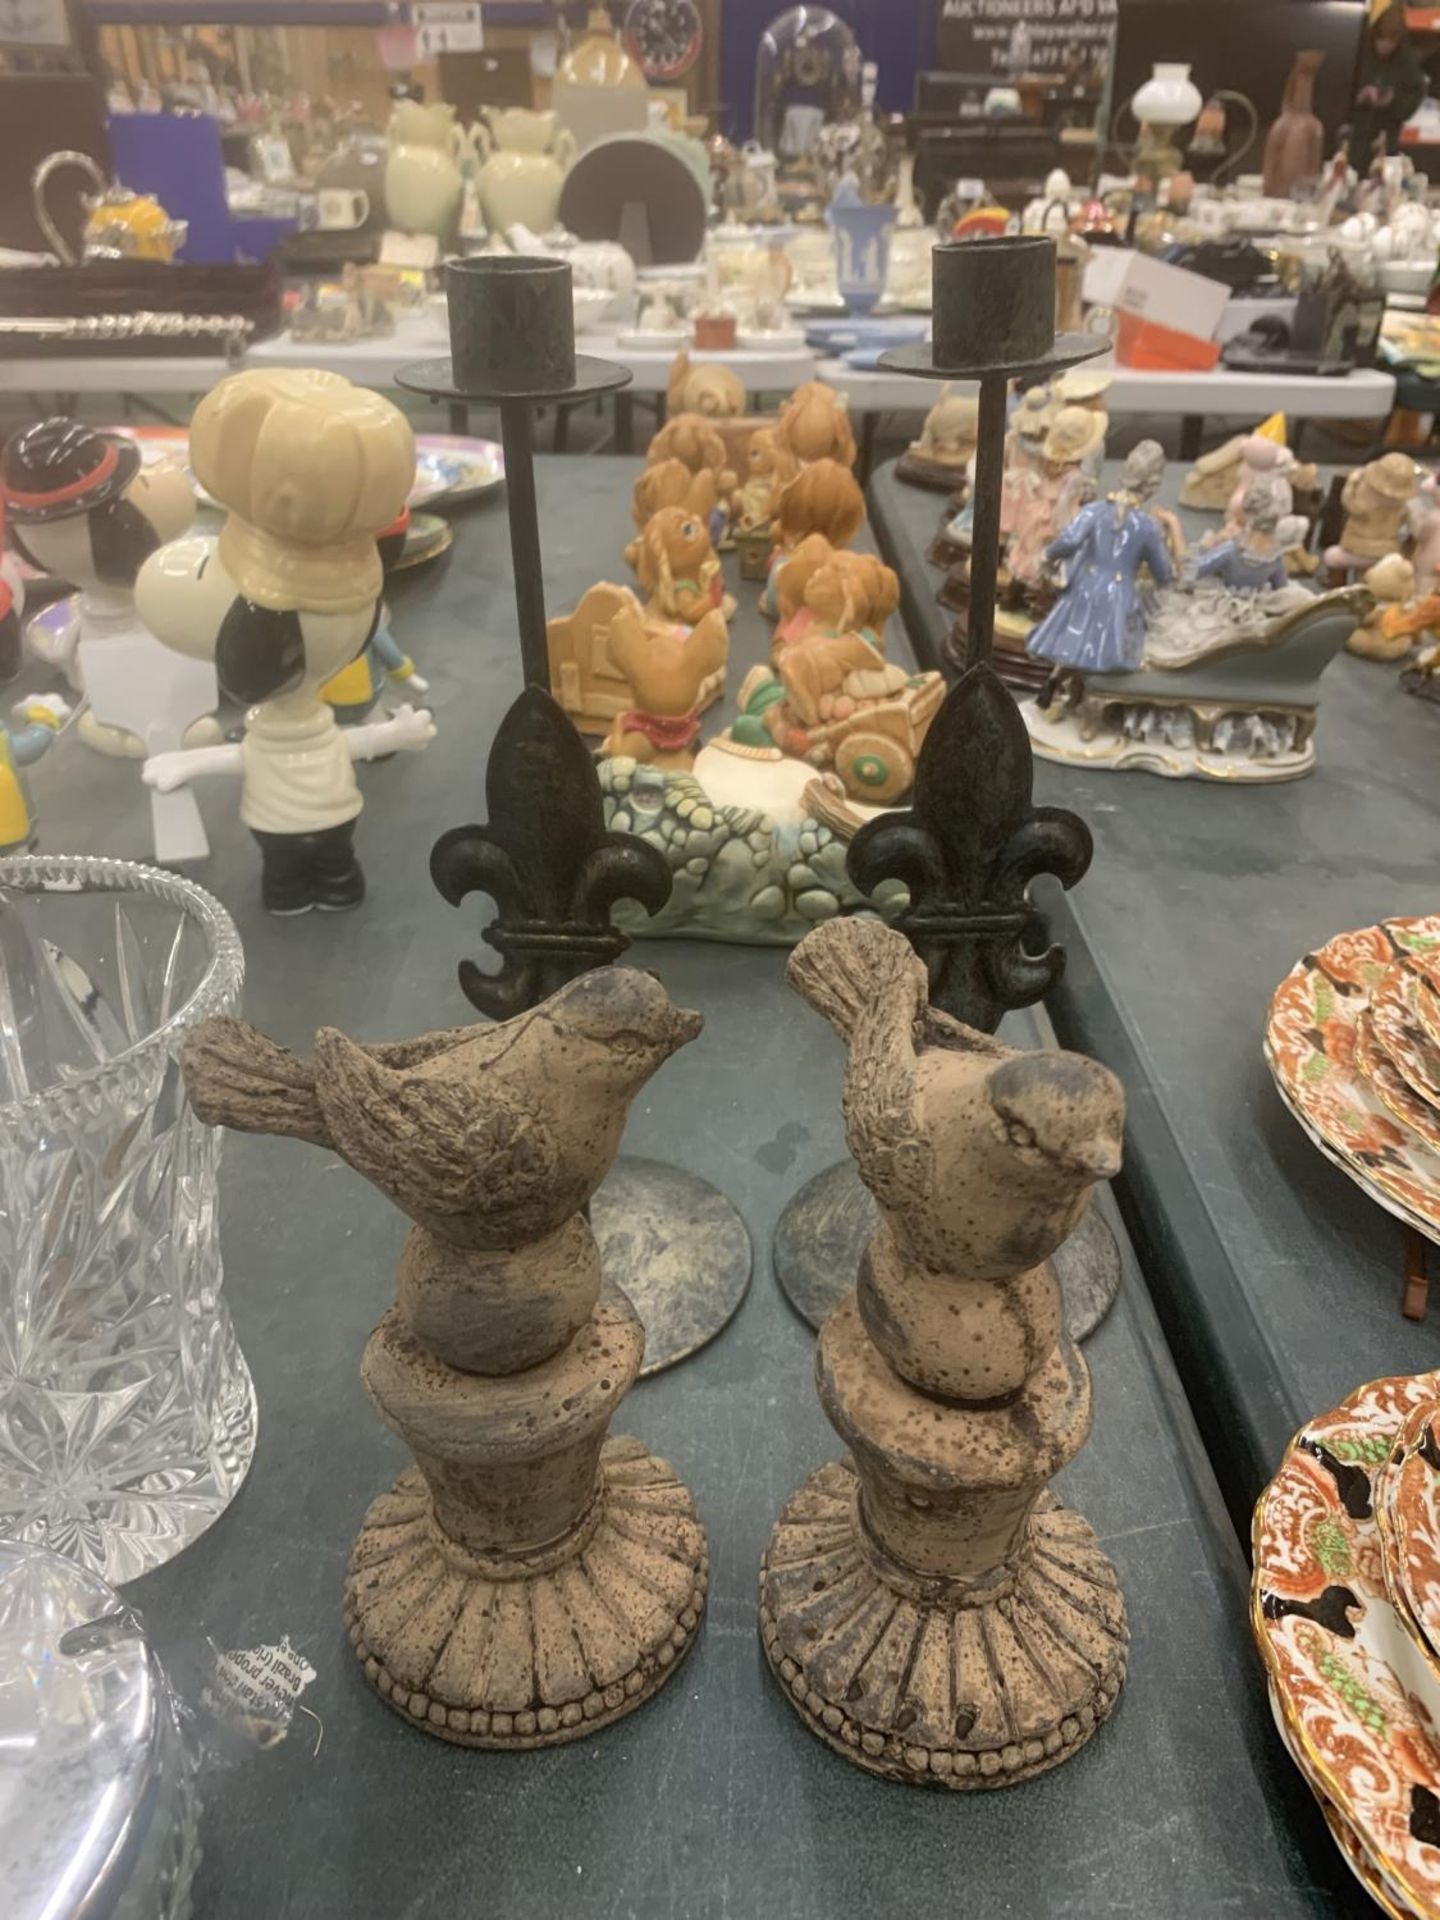 A PAIR OF METAL CANDLESTICKS WITH FLEUR-DU-LYS DECORATION AND A PAIR OF STONE BIRD FIGURES